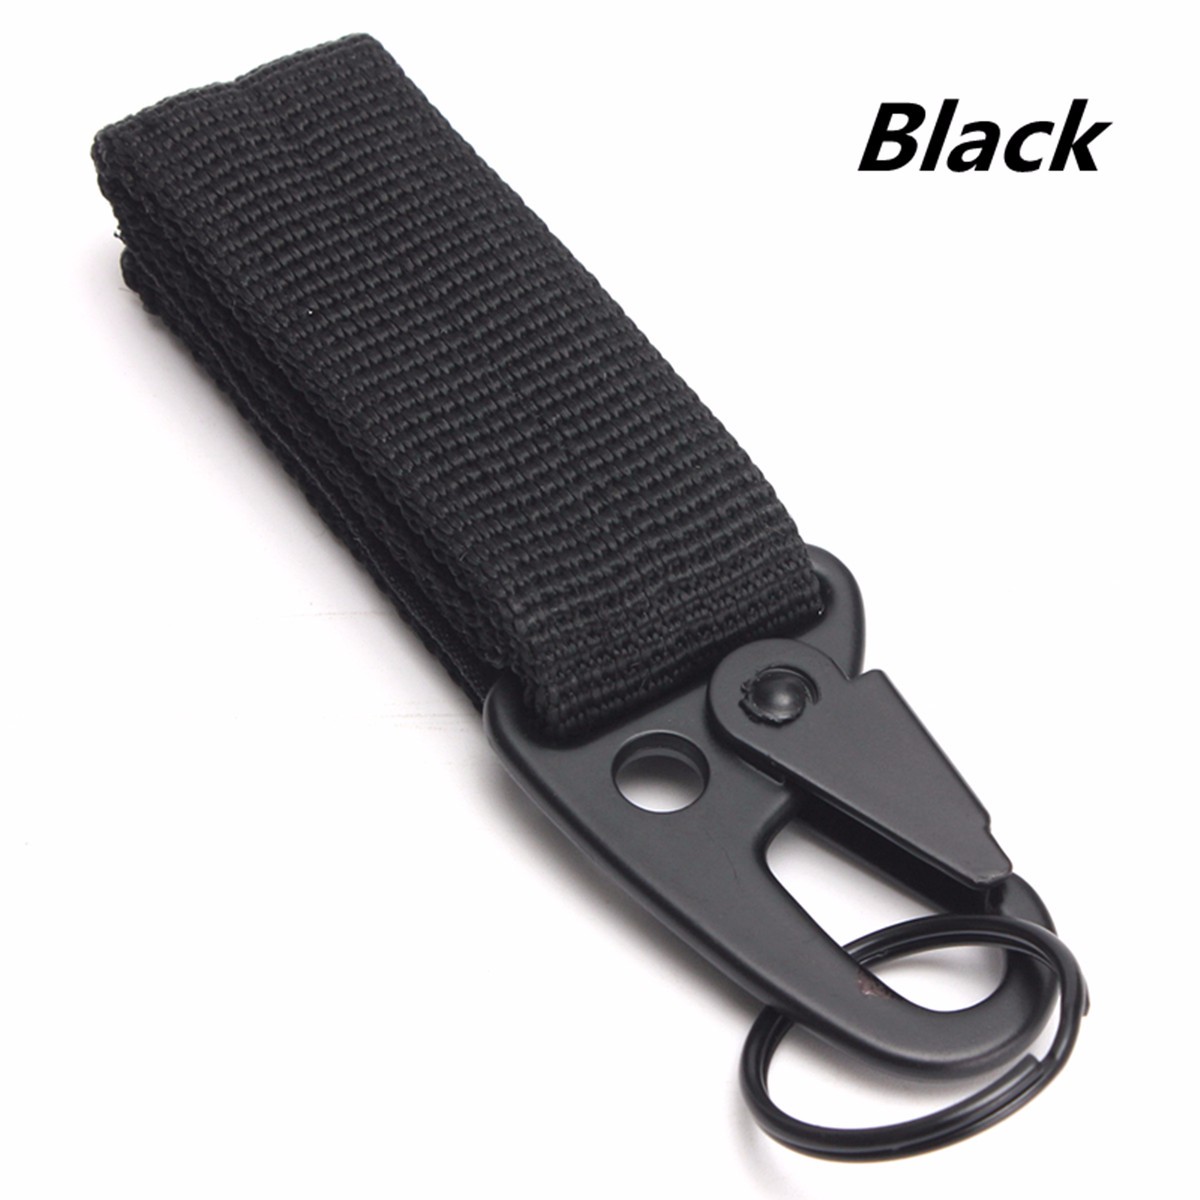 Colorful-Climbing-Tactical-Ring-Tactical-Keychain-Buckle-Clip-Holder-1034750